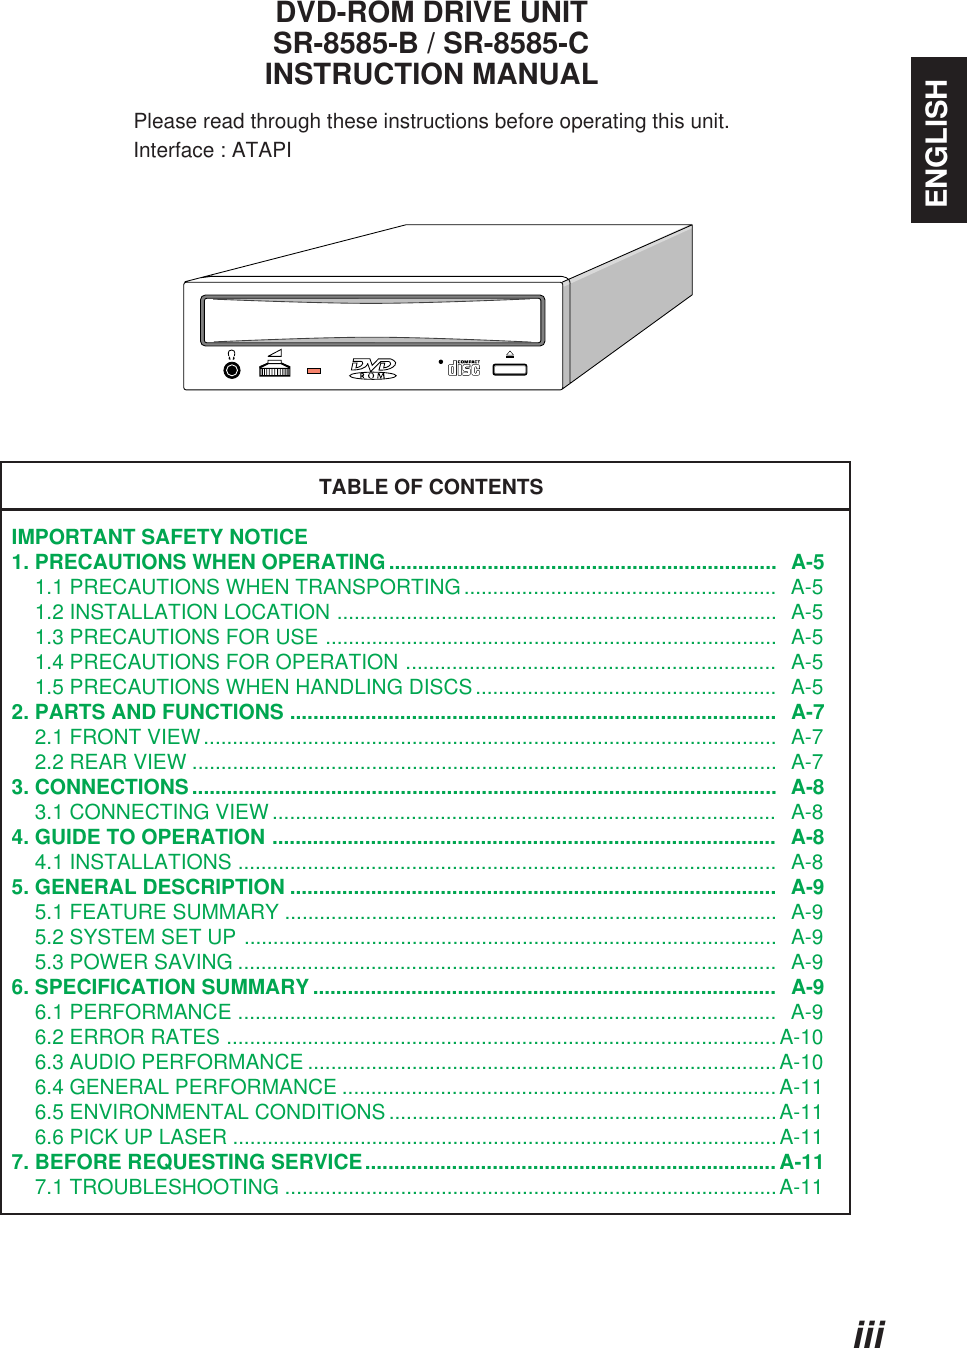 iiiENGLISHDVD-ROM DRIVE UNITSR-8585-B / SR-8585-CINSTRUCTION MANUALPlease read through these instructions before operating this unit.                     Interface : ATAPITABLE OF CONTENTSIMPORTANT SAFETY NOTICE1. PRECAUTIONS WHEN OPERATING...................................................................  A-5    1.1 PRECAUTIONS WHEN TRANSPORTING......................................................  A-5    1.2 INSTALLATION LOCATION ............................................................................  A-5    1.3 PRECAUTIONS FOR USE ..............................................................................  A-5    1.4 PRECAUTIONS FOR OPERATION ................................................................   A-5    1.5 PRECAUTIONS WHEN HANDLING DISCS....................................................   A-52. PARTS AND FUNCTIONS ....................................................................................   A-7    2.1 FRONT VIEW...................................................................................................  A-7    2.2 REAR VIEW .....................................................................................................  A-73. CONNECTIONS.....................................................................................................  A-8    3.1 CONNECTING VIEW .......................................................................................   A-84. GUIDE TO OPERATION .......................................................................................   A-8    4.1 INSTALLATIONS .............................................................................................   A-85. GENERAL DESCRIPTION ....................................................................................  A-9    5.1 FEATURE SUMMARY .....................................................................................  A-9    5.2 SYSTEM SET UP ............................................................................................  A-9    5.3 POWER SAVING .............................................................................................  A-96. SPECIFICATION SUMMARY ................................................................................   A-9    6.1 PERFORMANCE .............................................................................................   A-9    6.2 ERROR RATES ............................................................................................... A-10    6.3 AUDIO PERFORMANCE .................................................................................A-10    6.4 GENERAL PERFORMANCE ...........................................................................A-11    6.5 ENVIRONMENTAL CONDITIONS ...................................................................A-11    6.6 PICK UP LASER ..............................................................................................A-117. BEFORE REQUESTING SERVICE.......................................................................A-11    7.1 TROUBLESHOOTING .....................................................................................A-11